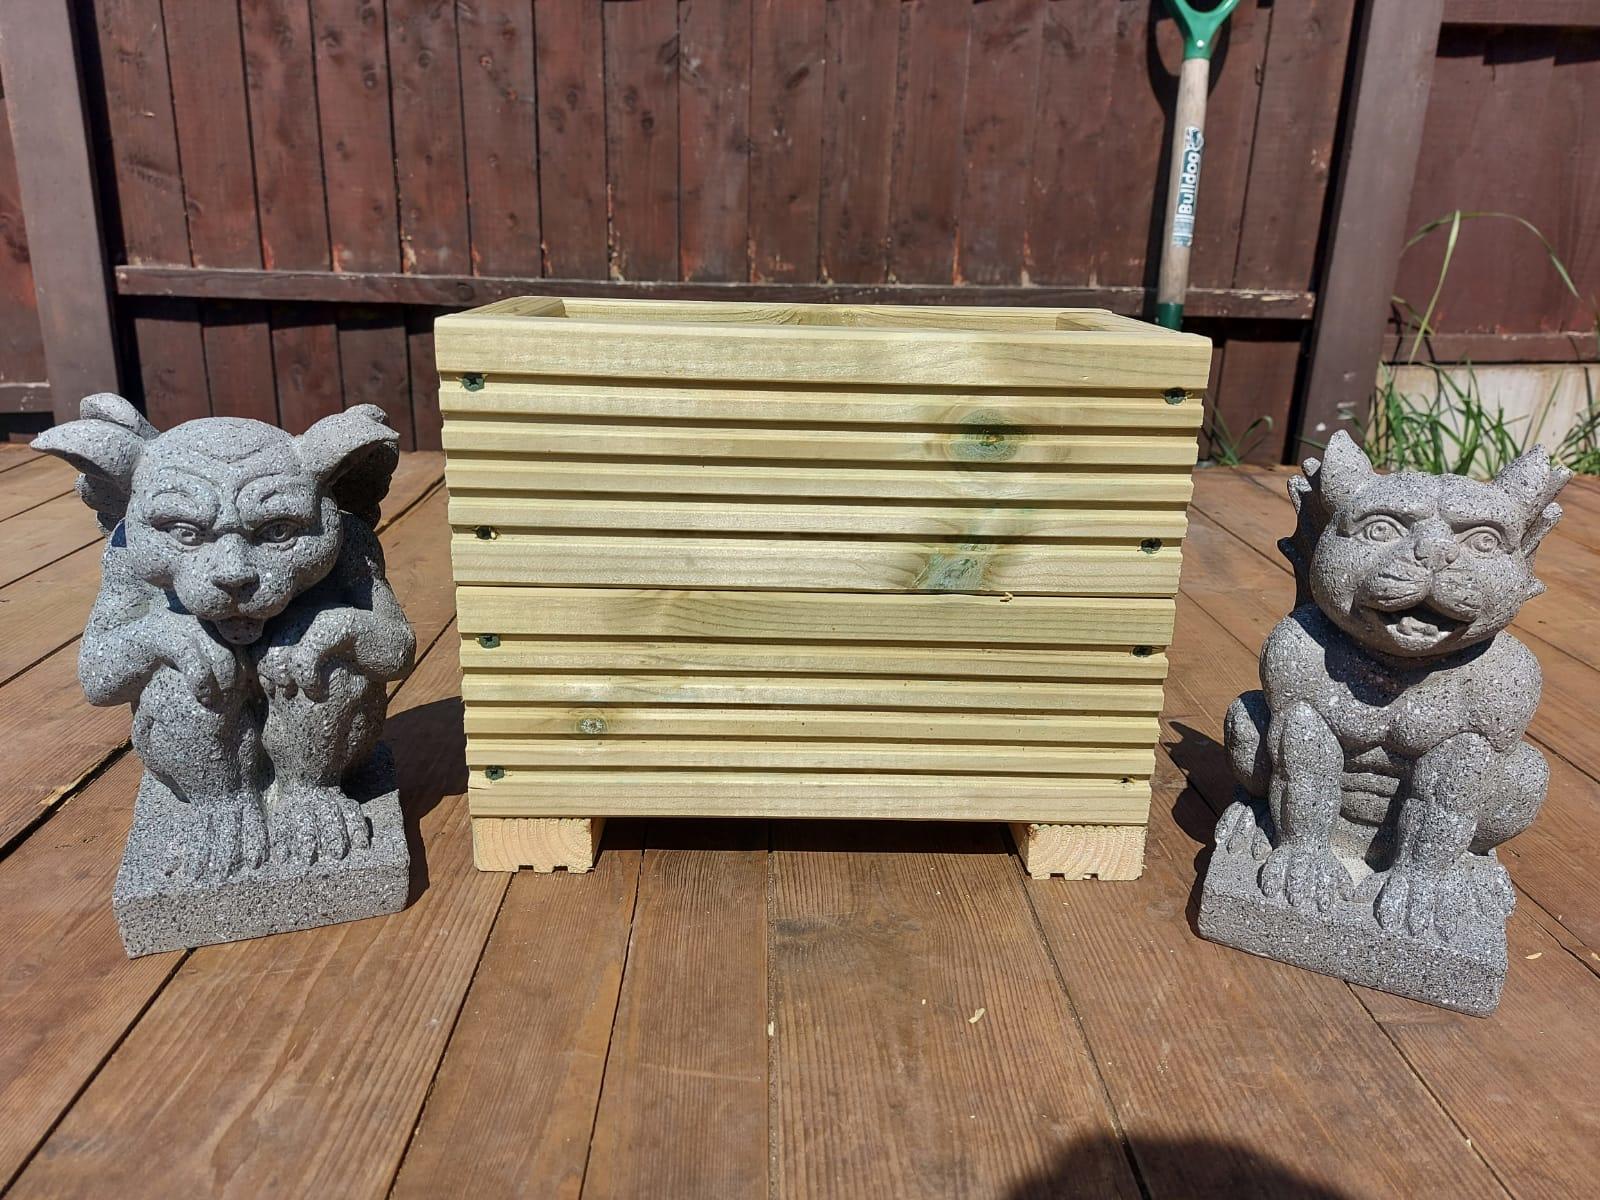 decking planter on a deck base with statues either side